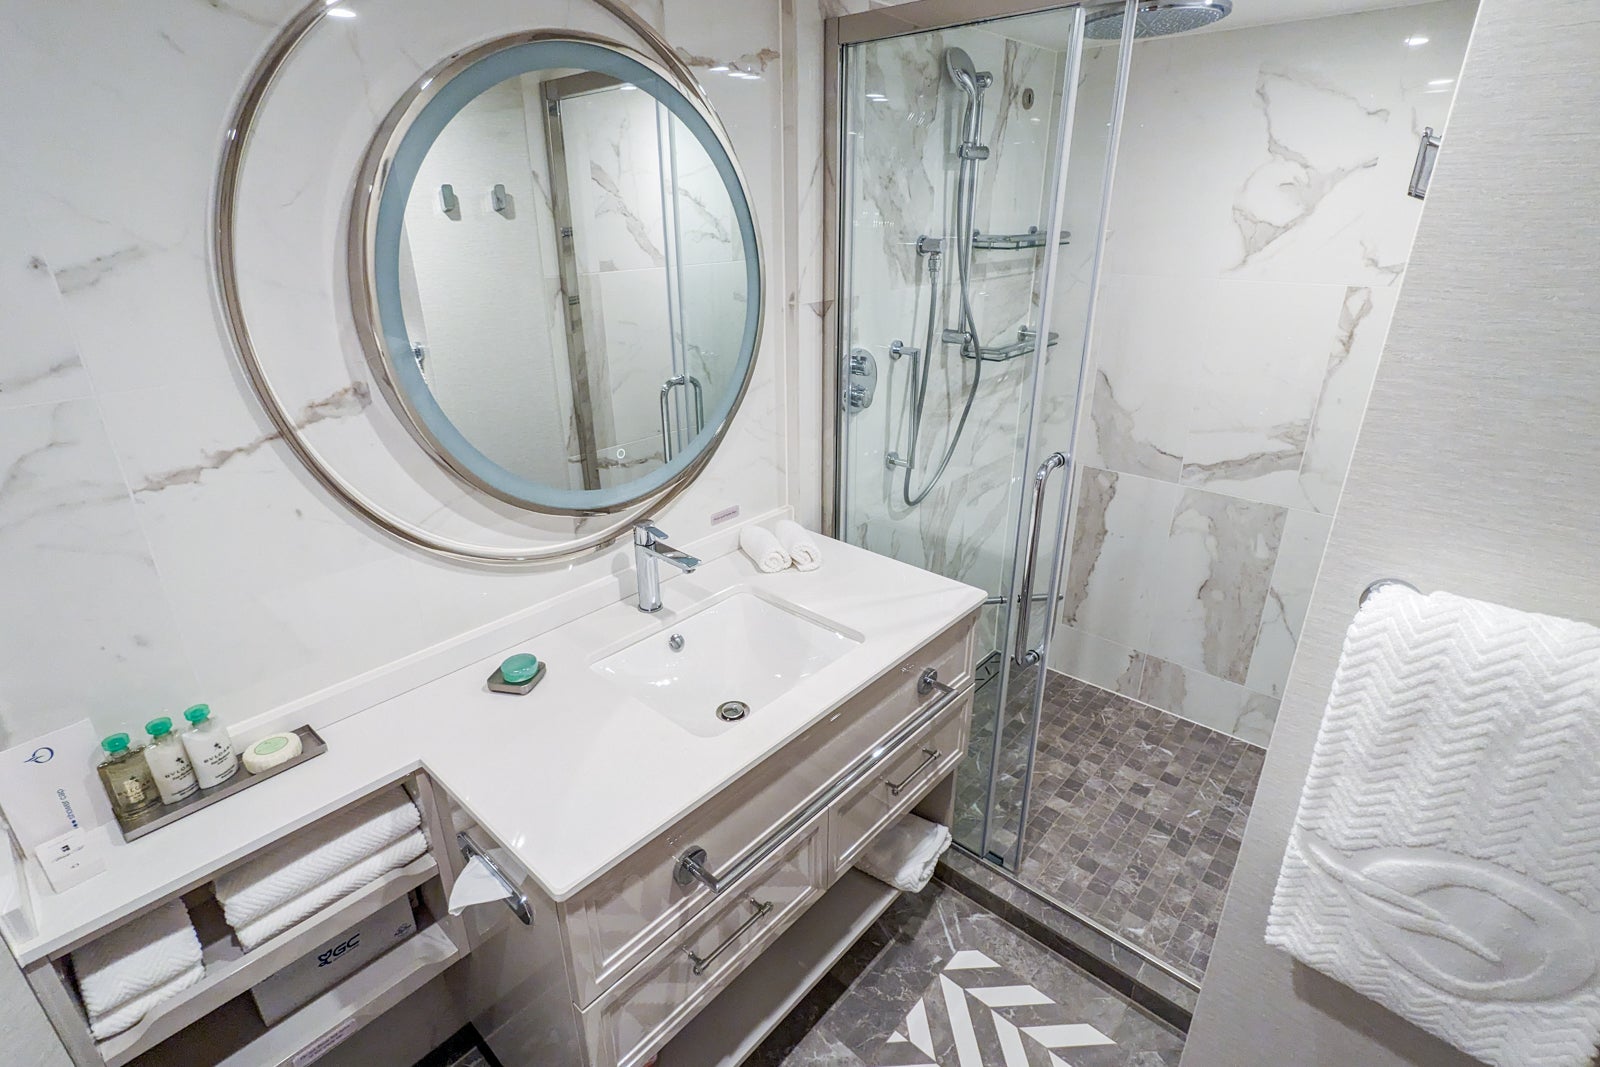 White marble cruise ship bathroom with circular mirror, square sink and glass shower